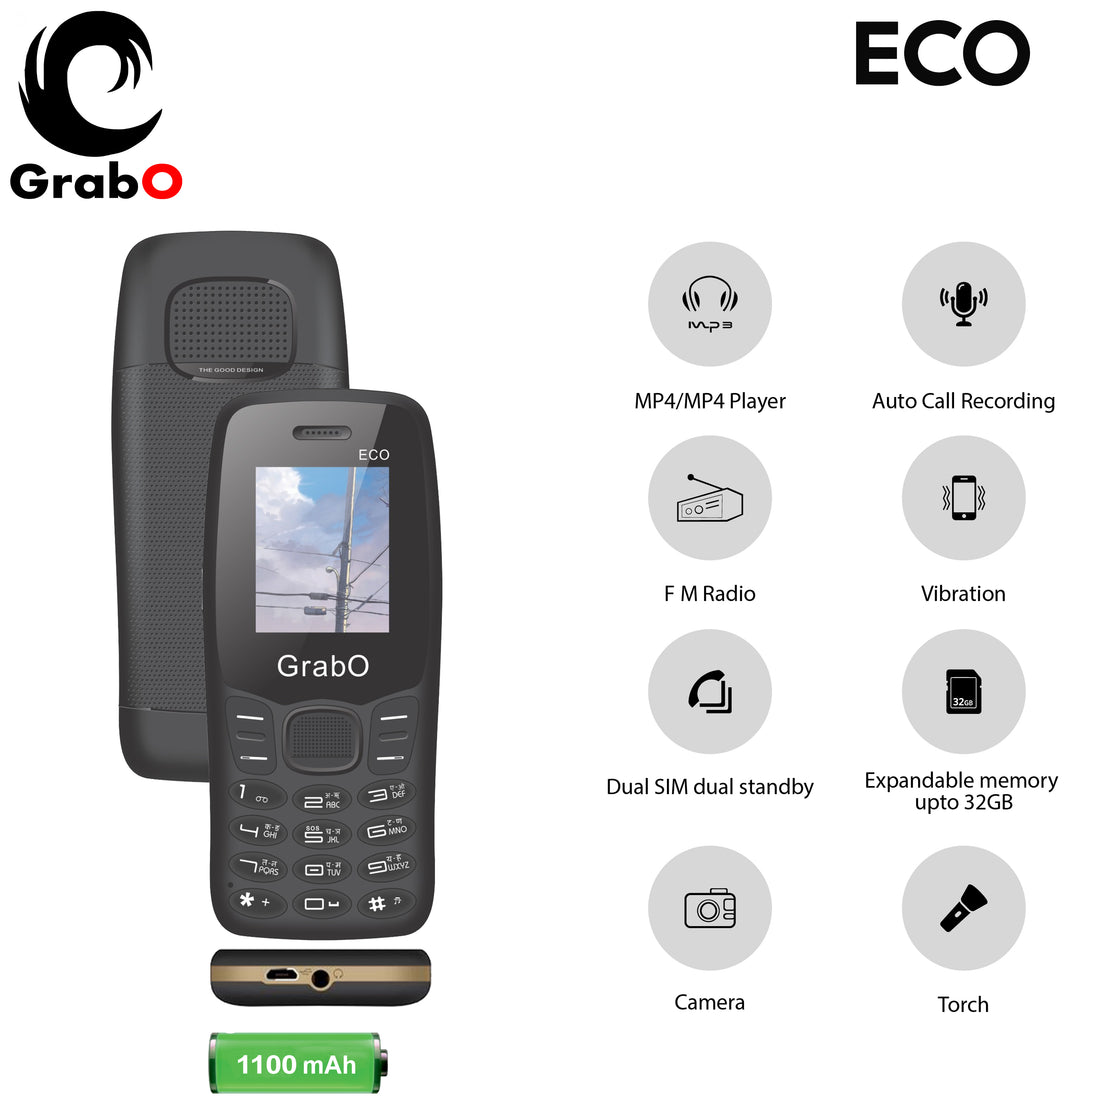 GRABO ECO 1.8 Inch Display with 1100mAh Battery